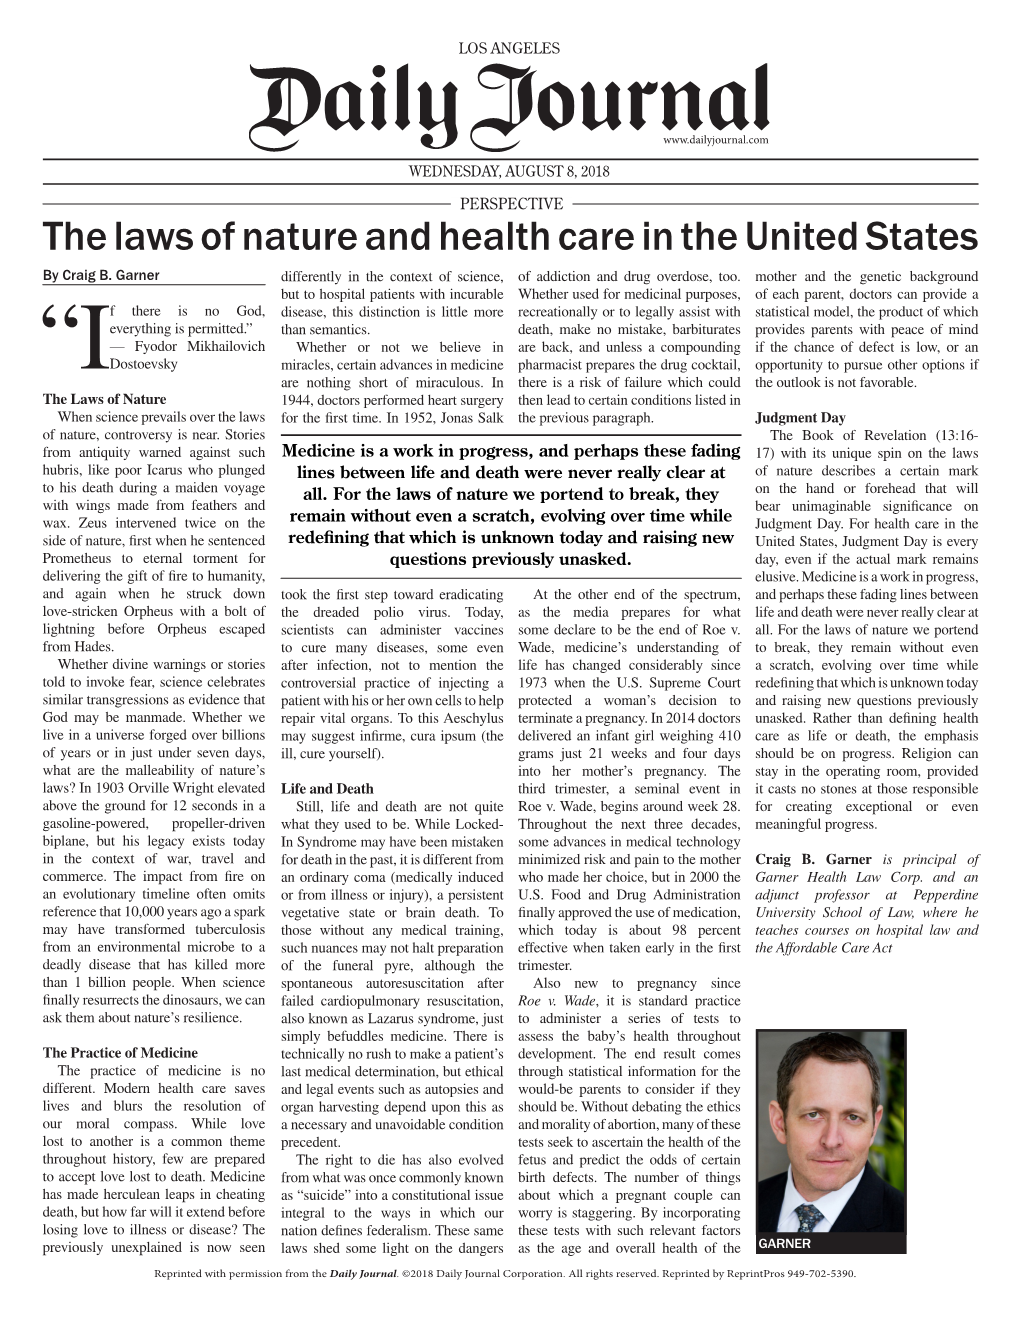 Health Care and the Laws of Nature